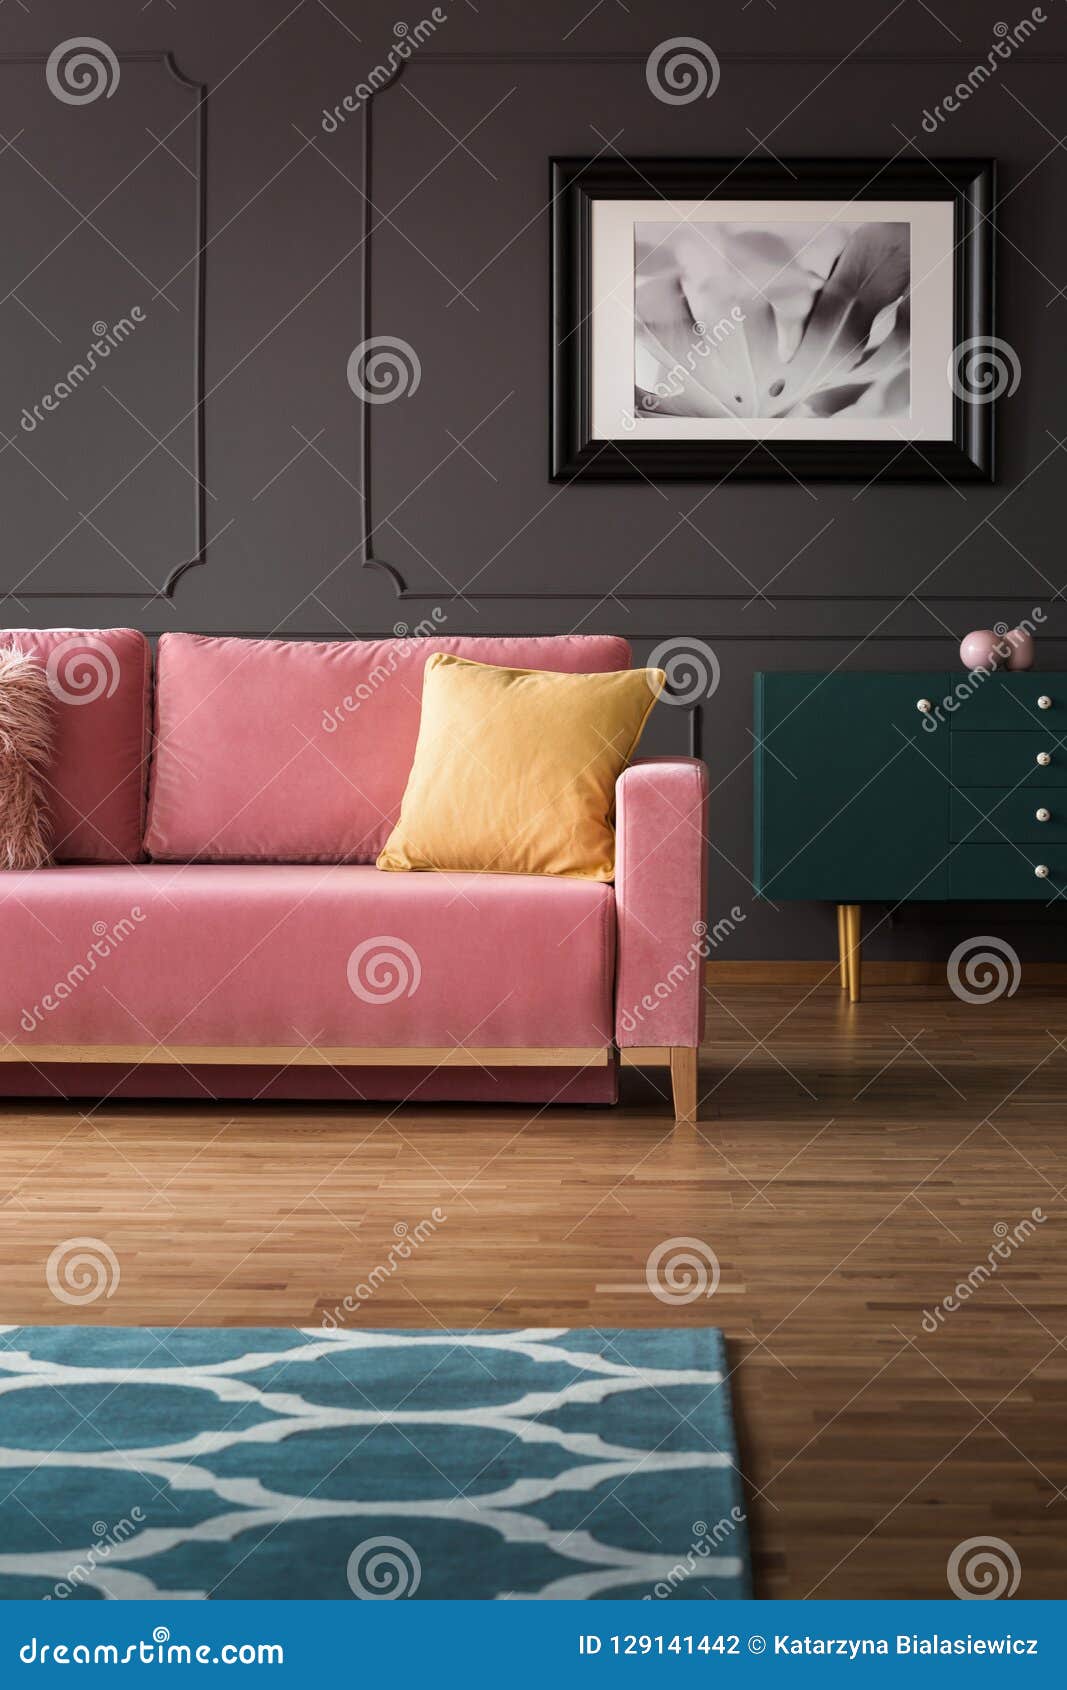 fancy dresser with golden s and a velvet pink sofa on hardwood floor in a vintage living room interior with gray walls. rea